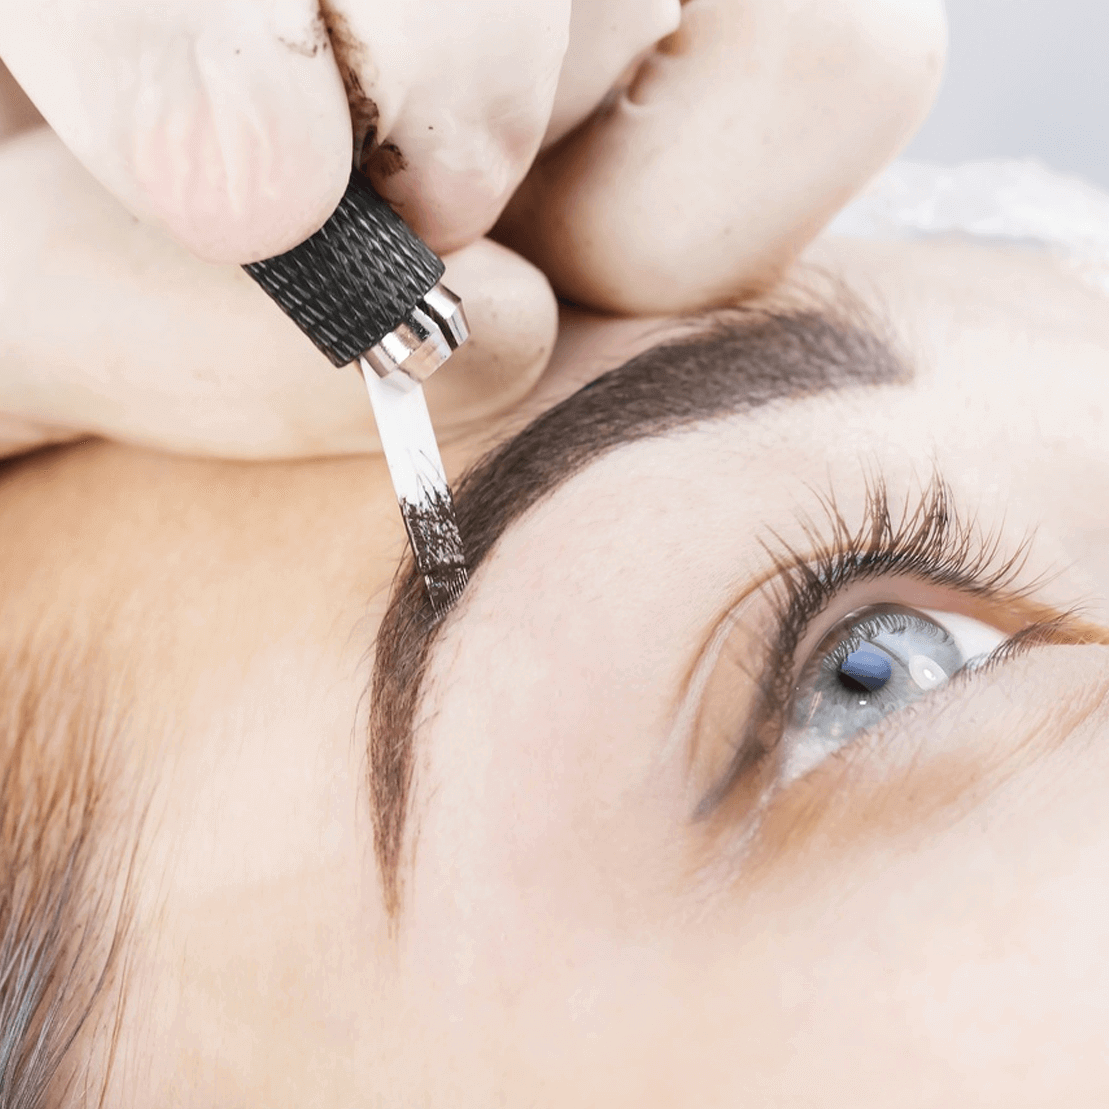 girl has microblading on face